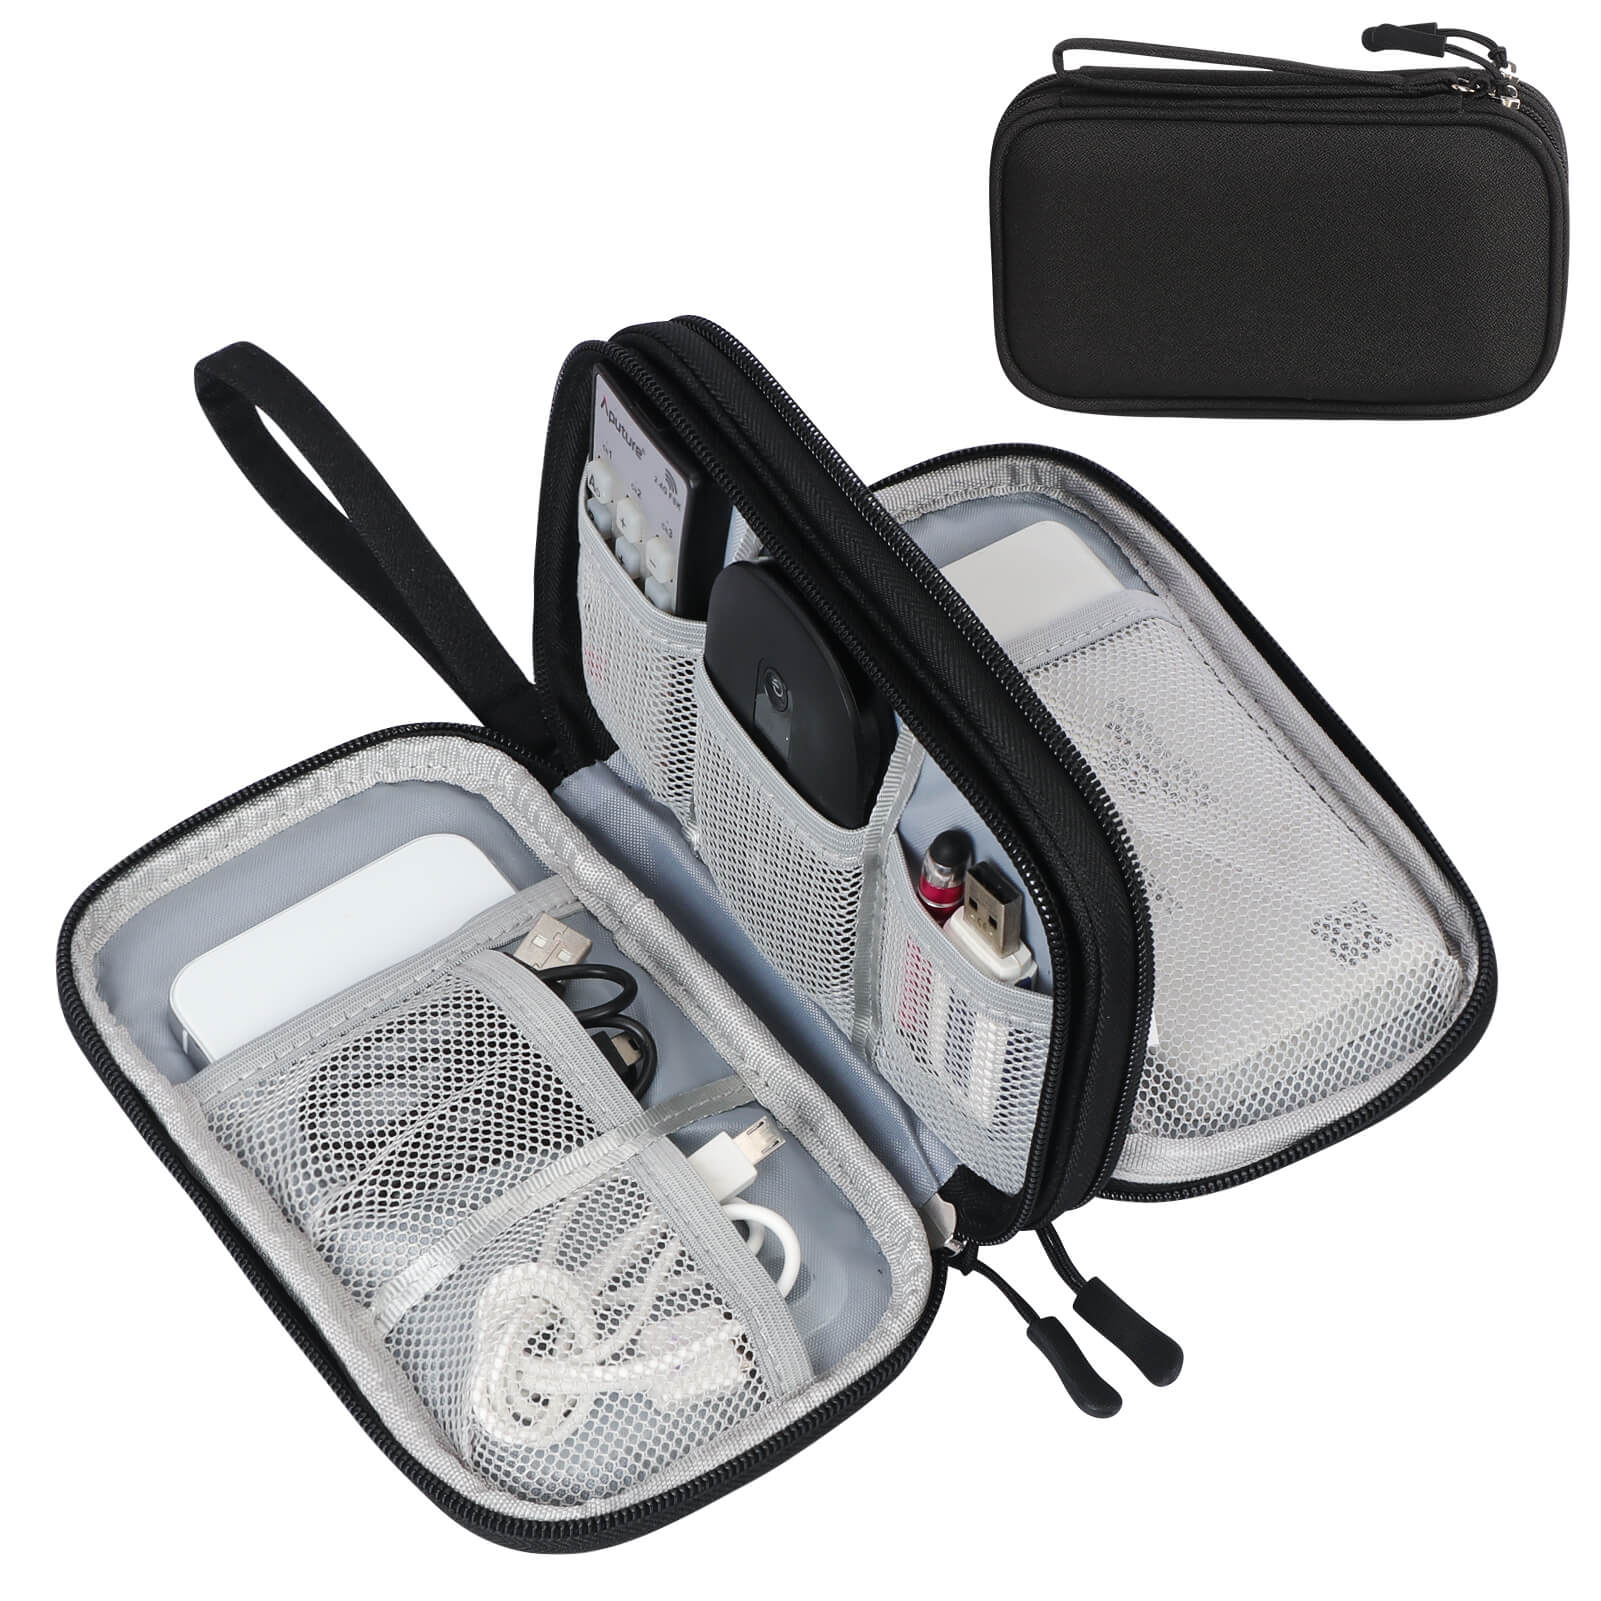 Double Layer Electronic Organizer Bag